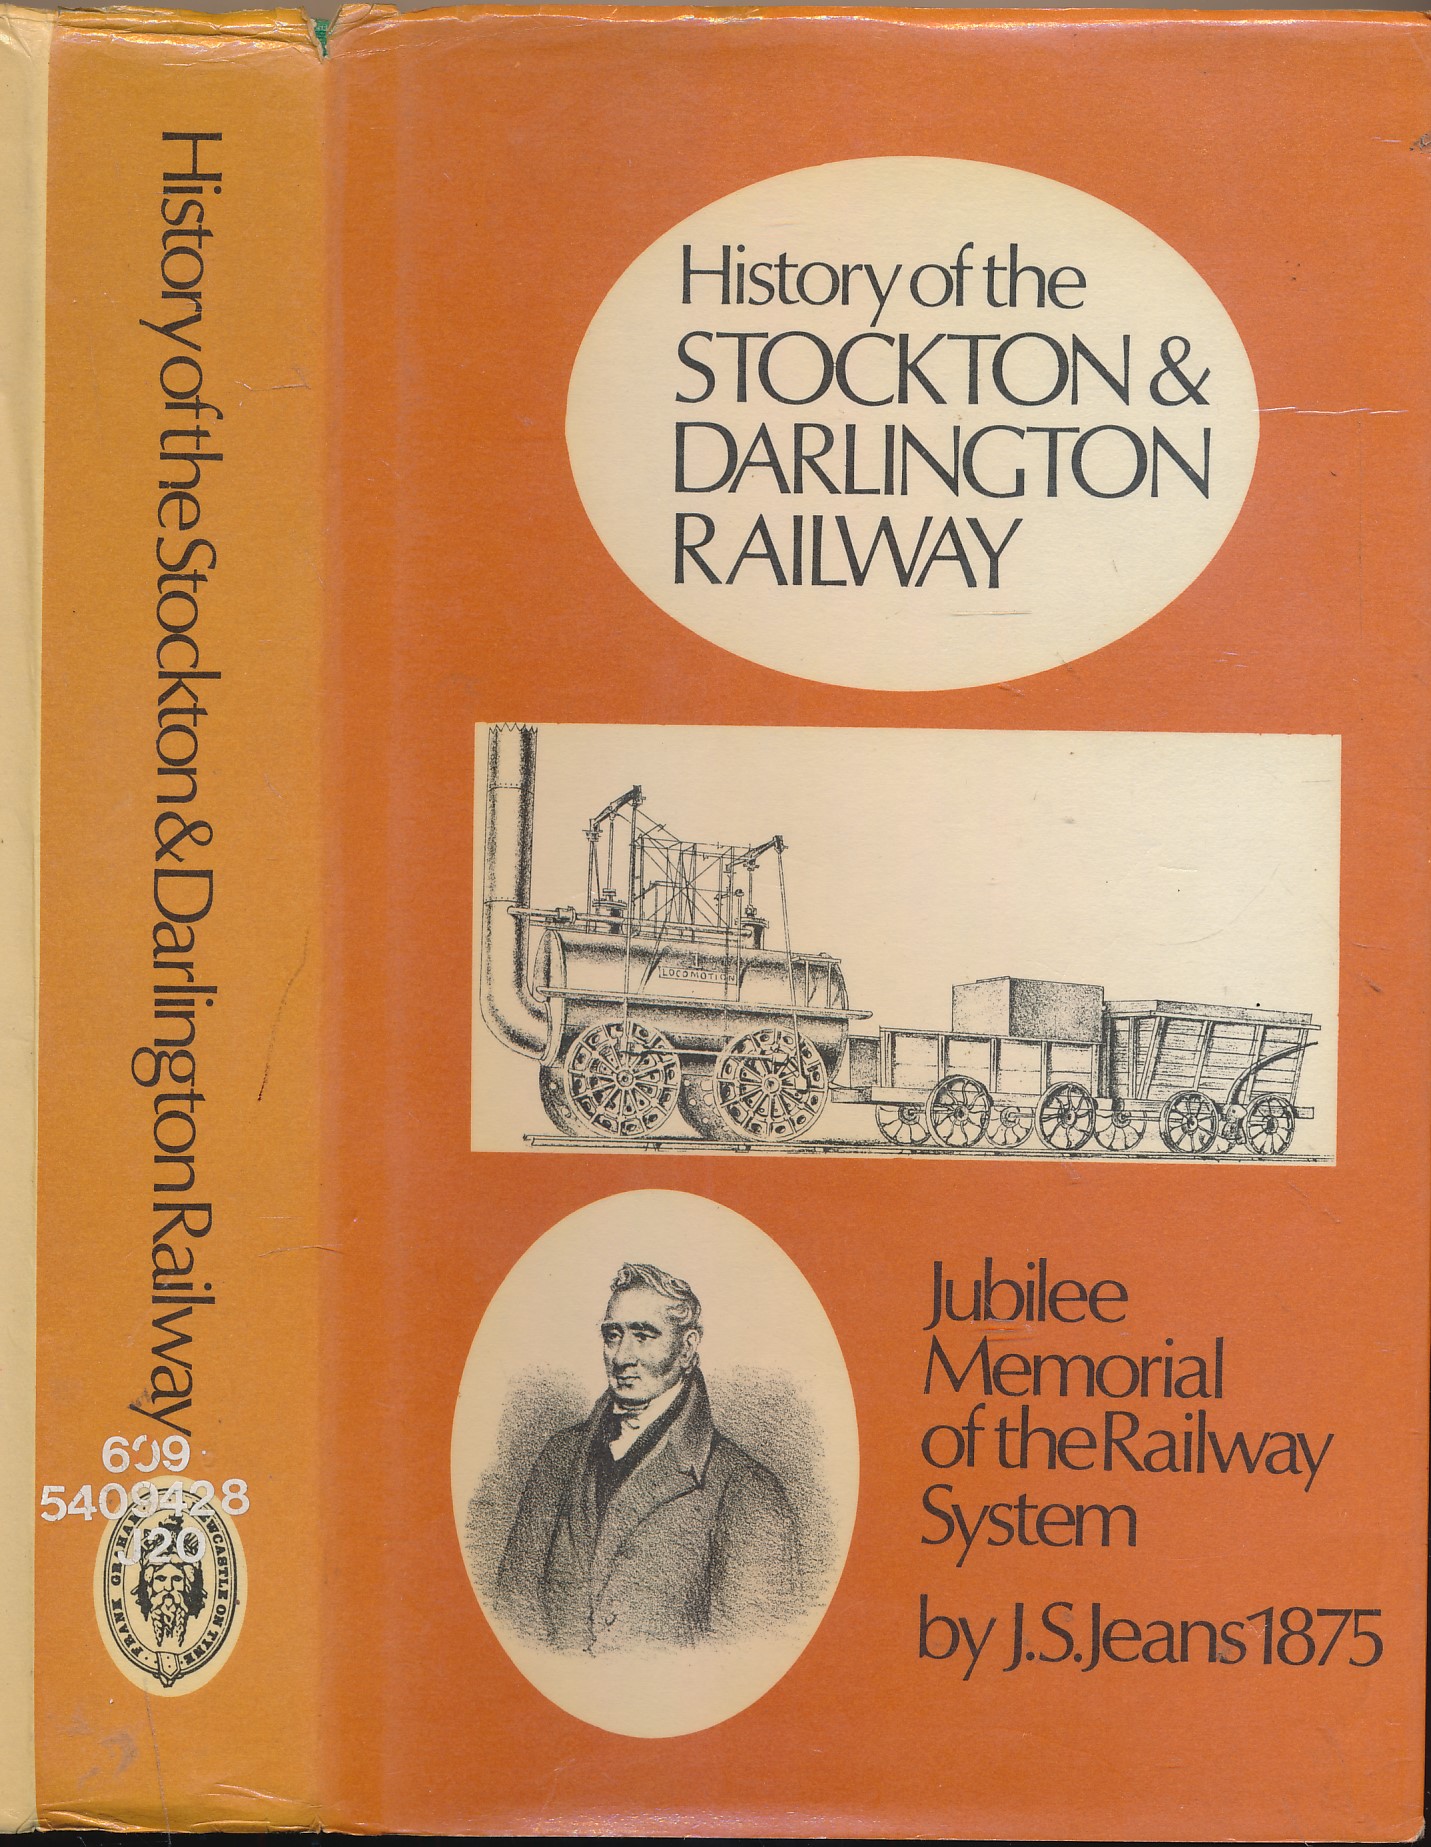 A Jubilee Memorial of the Railway System. History of the Stockton and Darlington Railway.